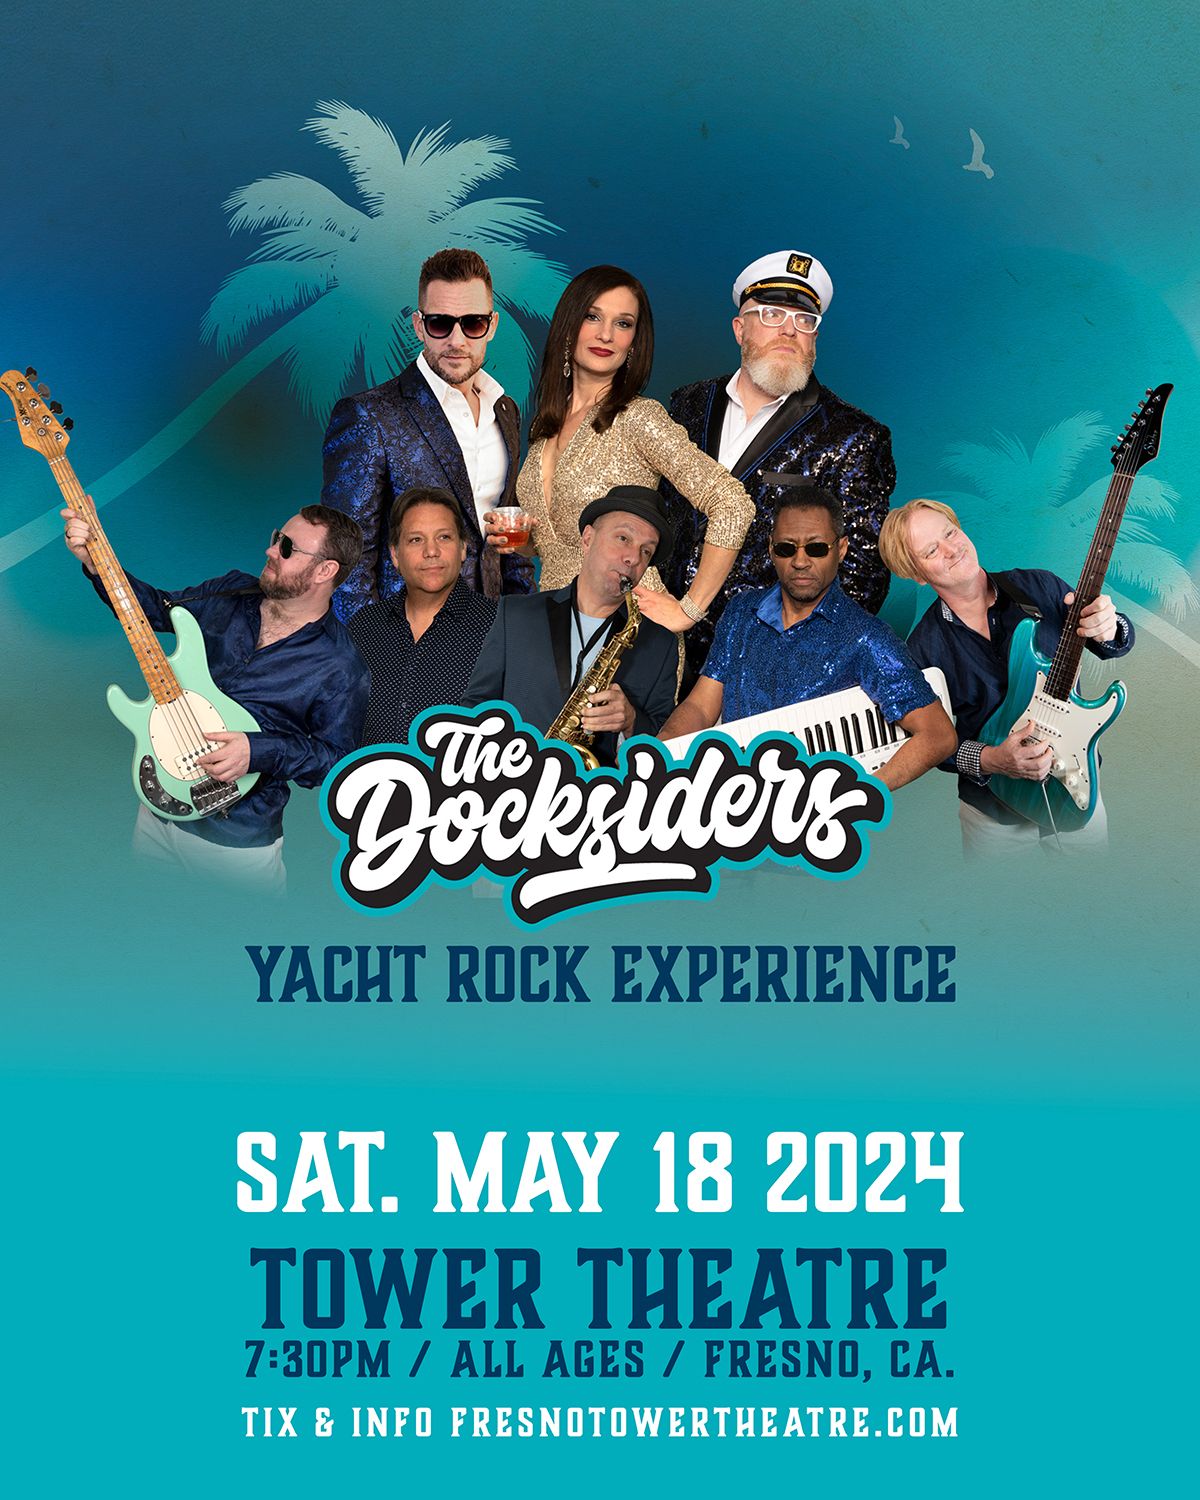 The Docksiders: Yacht Rock Experience